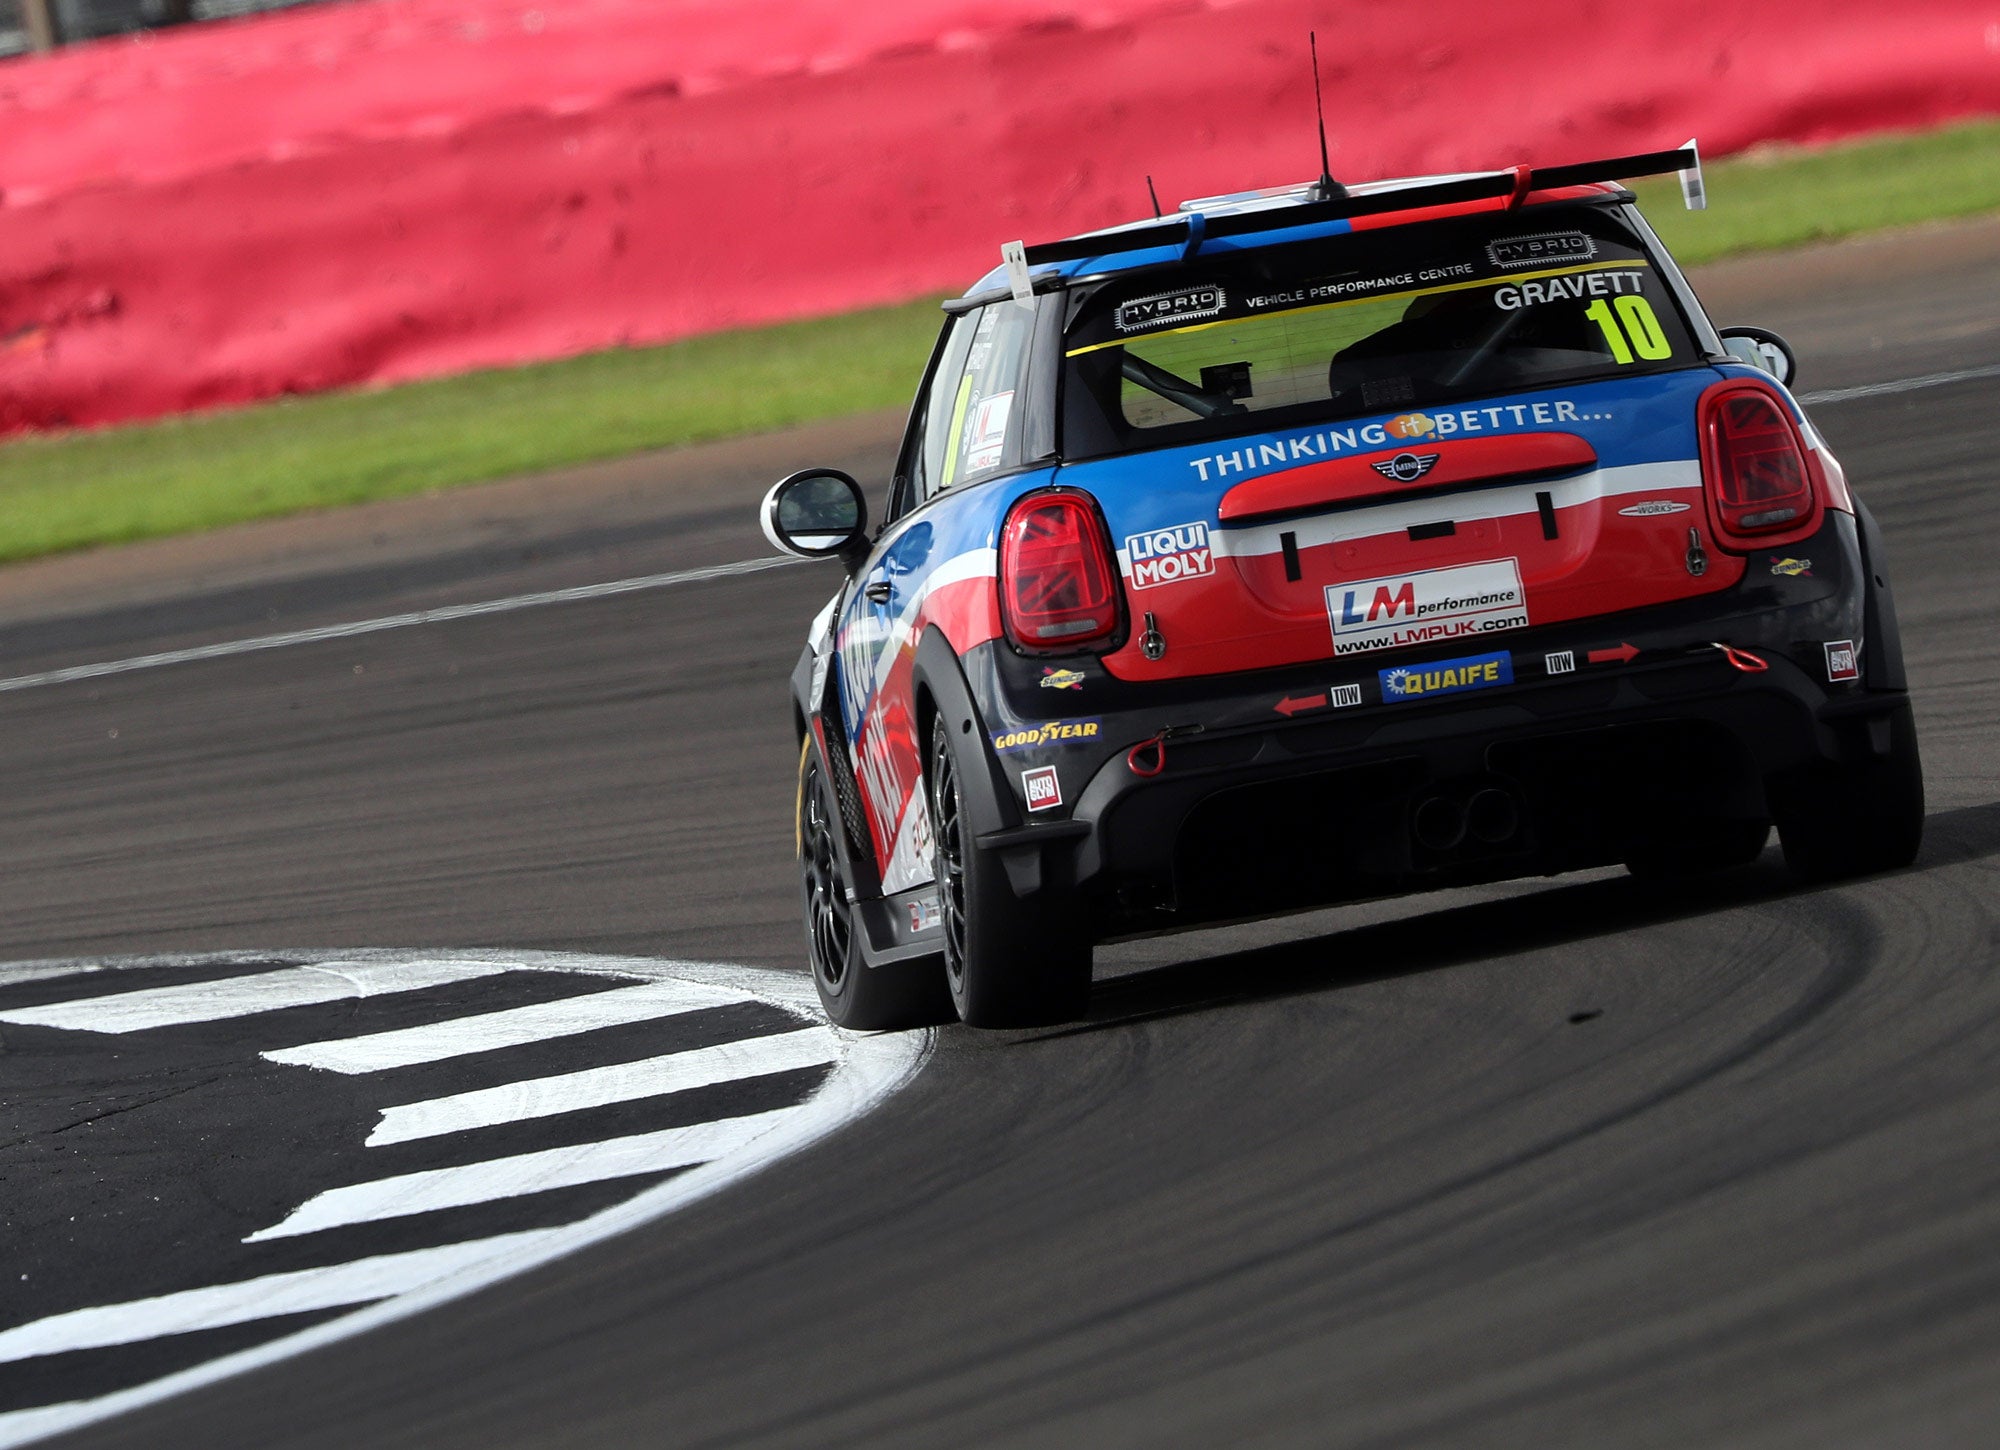 Bradley Gravett son of BTCC British Touring Car Champion Robb Gravett in the MINI Challenge JCW Series at Silverstone with EXCELR8 Motorsport turning into Brooklands corner Cooper Racing Driver LIQUI MOLY LM Performance Thinking it Better